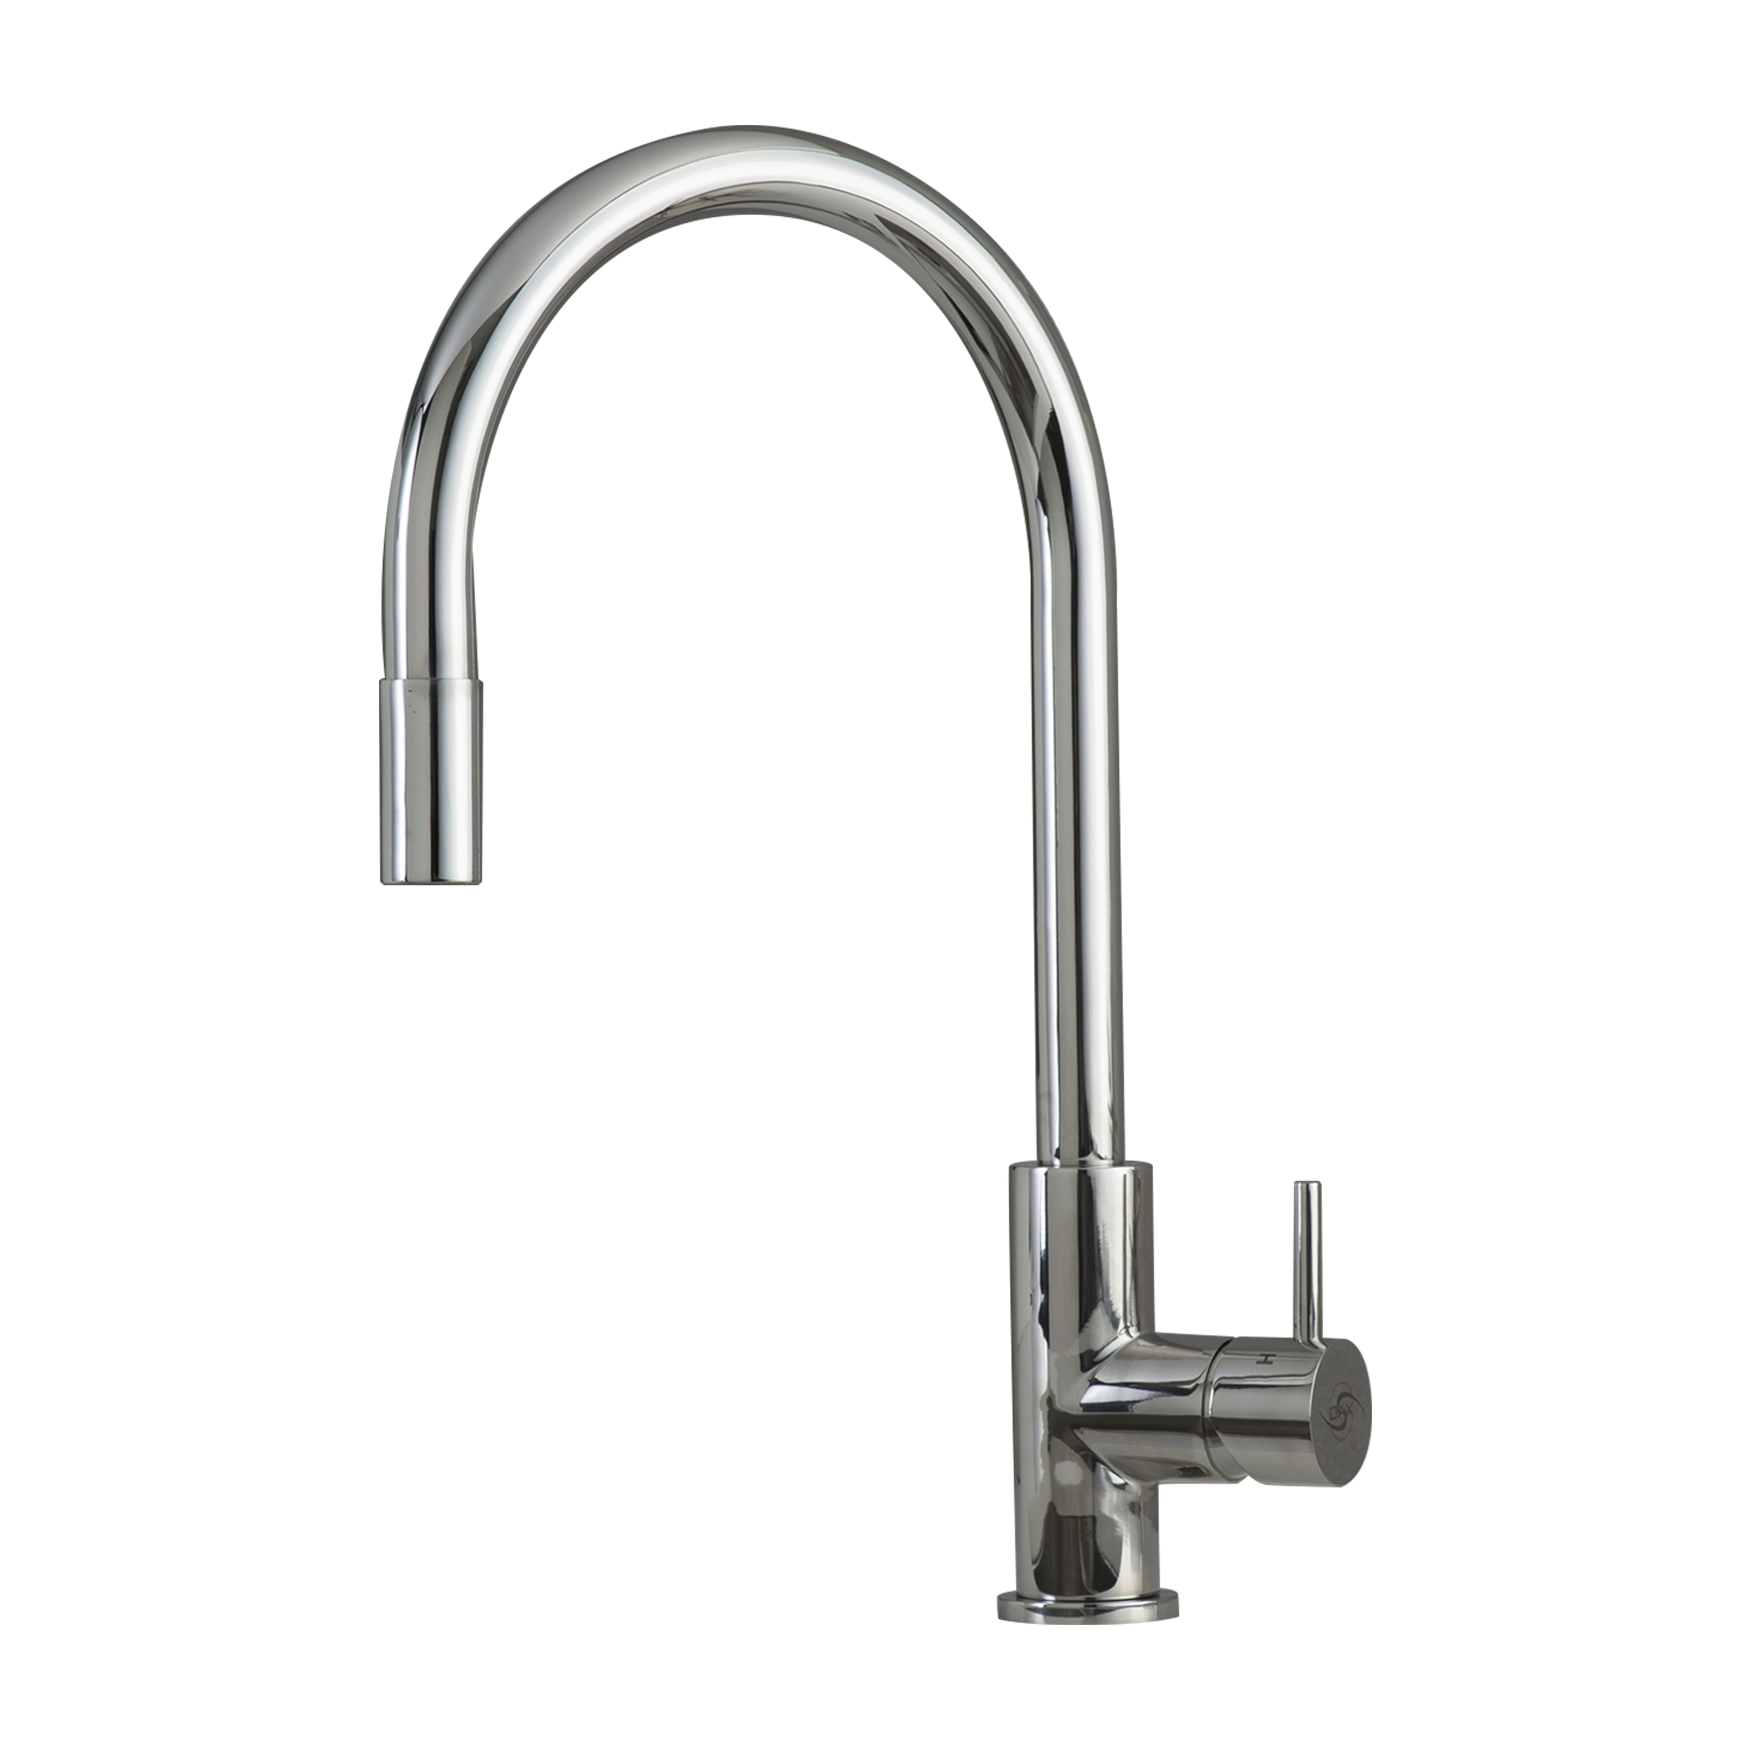 DAX Single Handle Pull Down Kitchen Faucet, Stainless Steel Shower Head and Body, Chrome Finish, Size 8-11/16 x 16-9/16 Inches (DAX-003-02-CR)